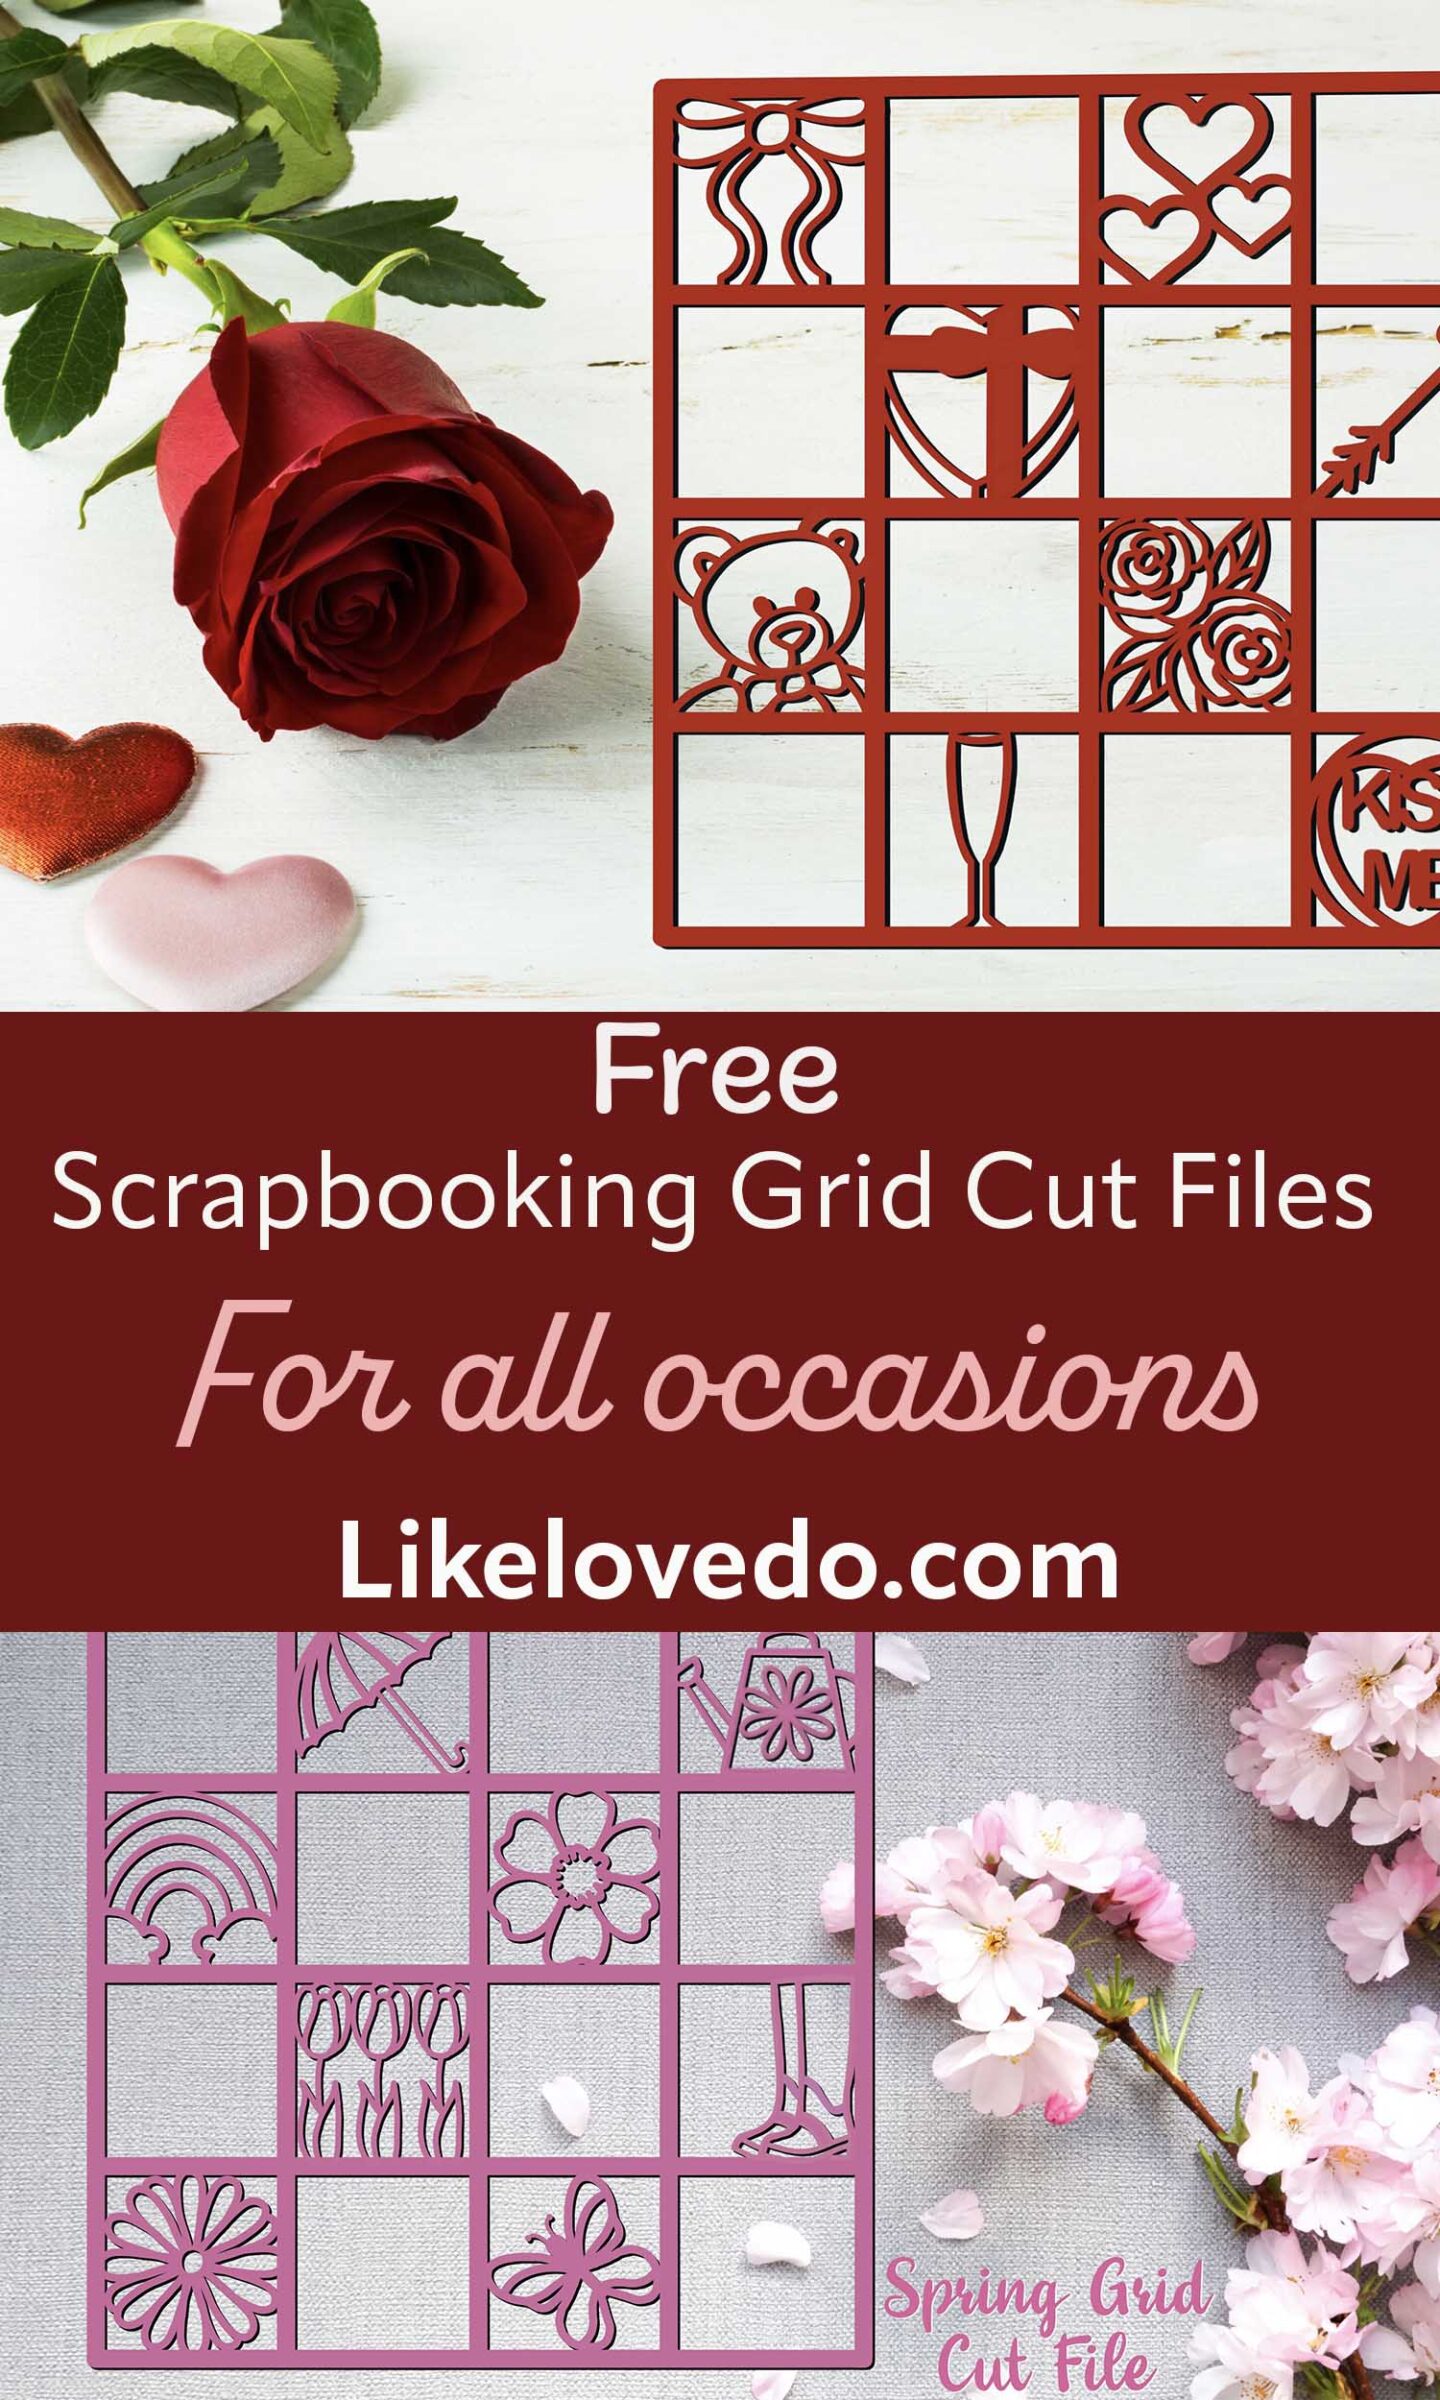 Free scrapbooking grid cutfiles for all occasions New year, valentines and each season for easy scrapbooking